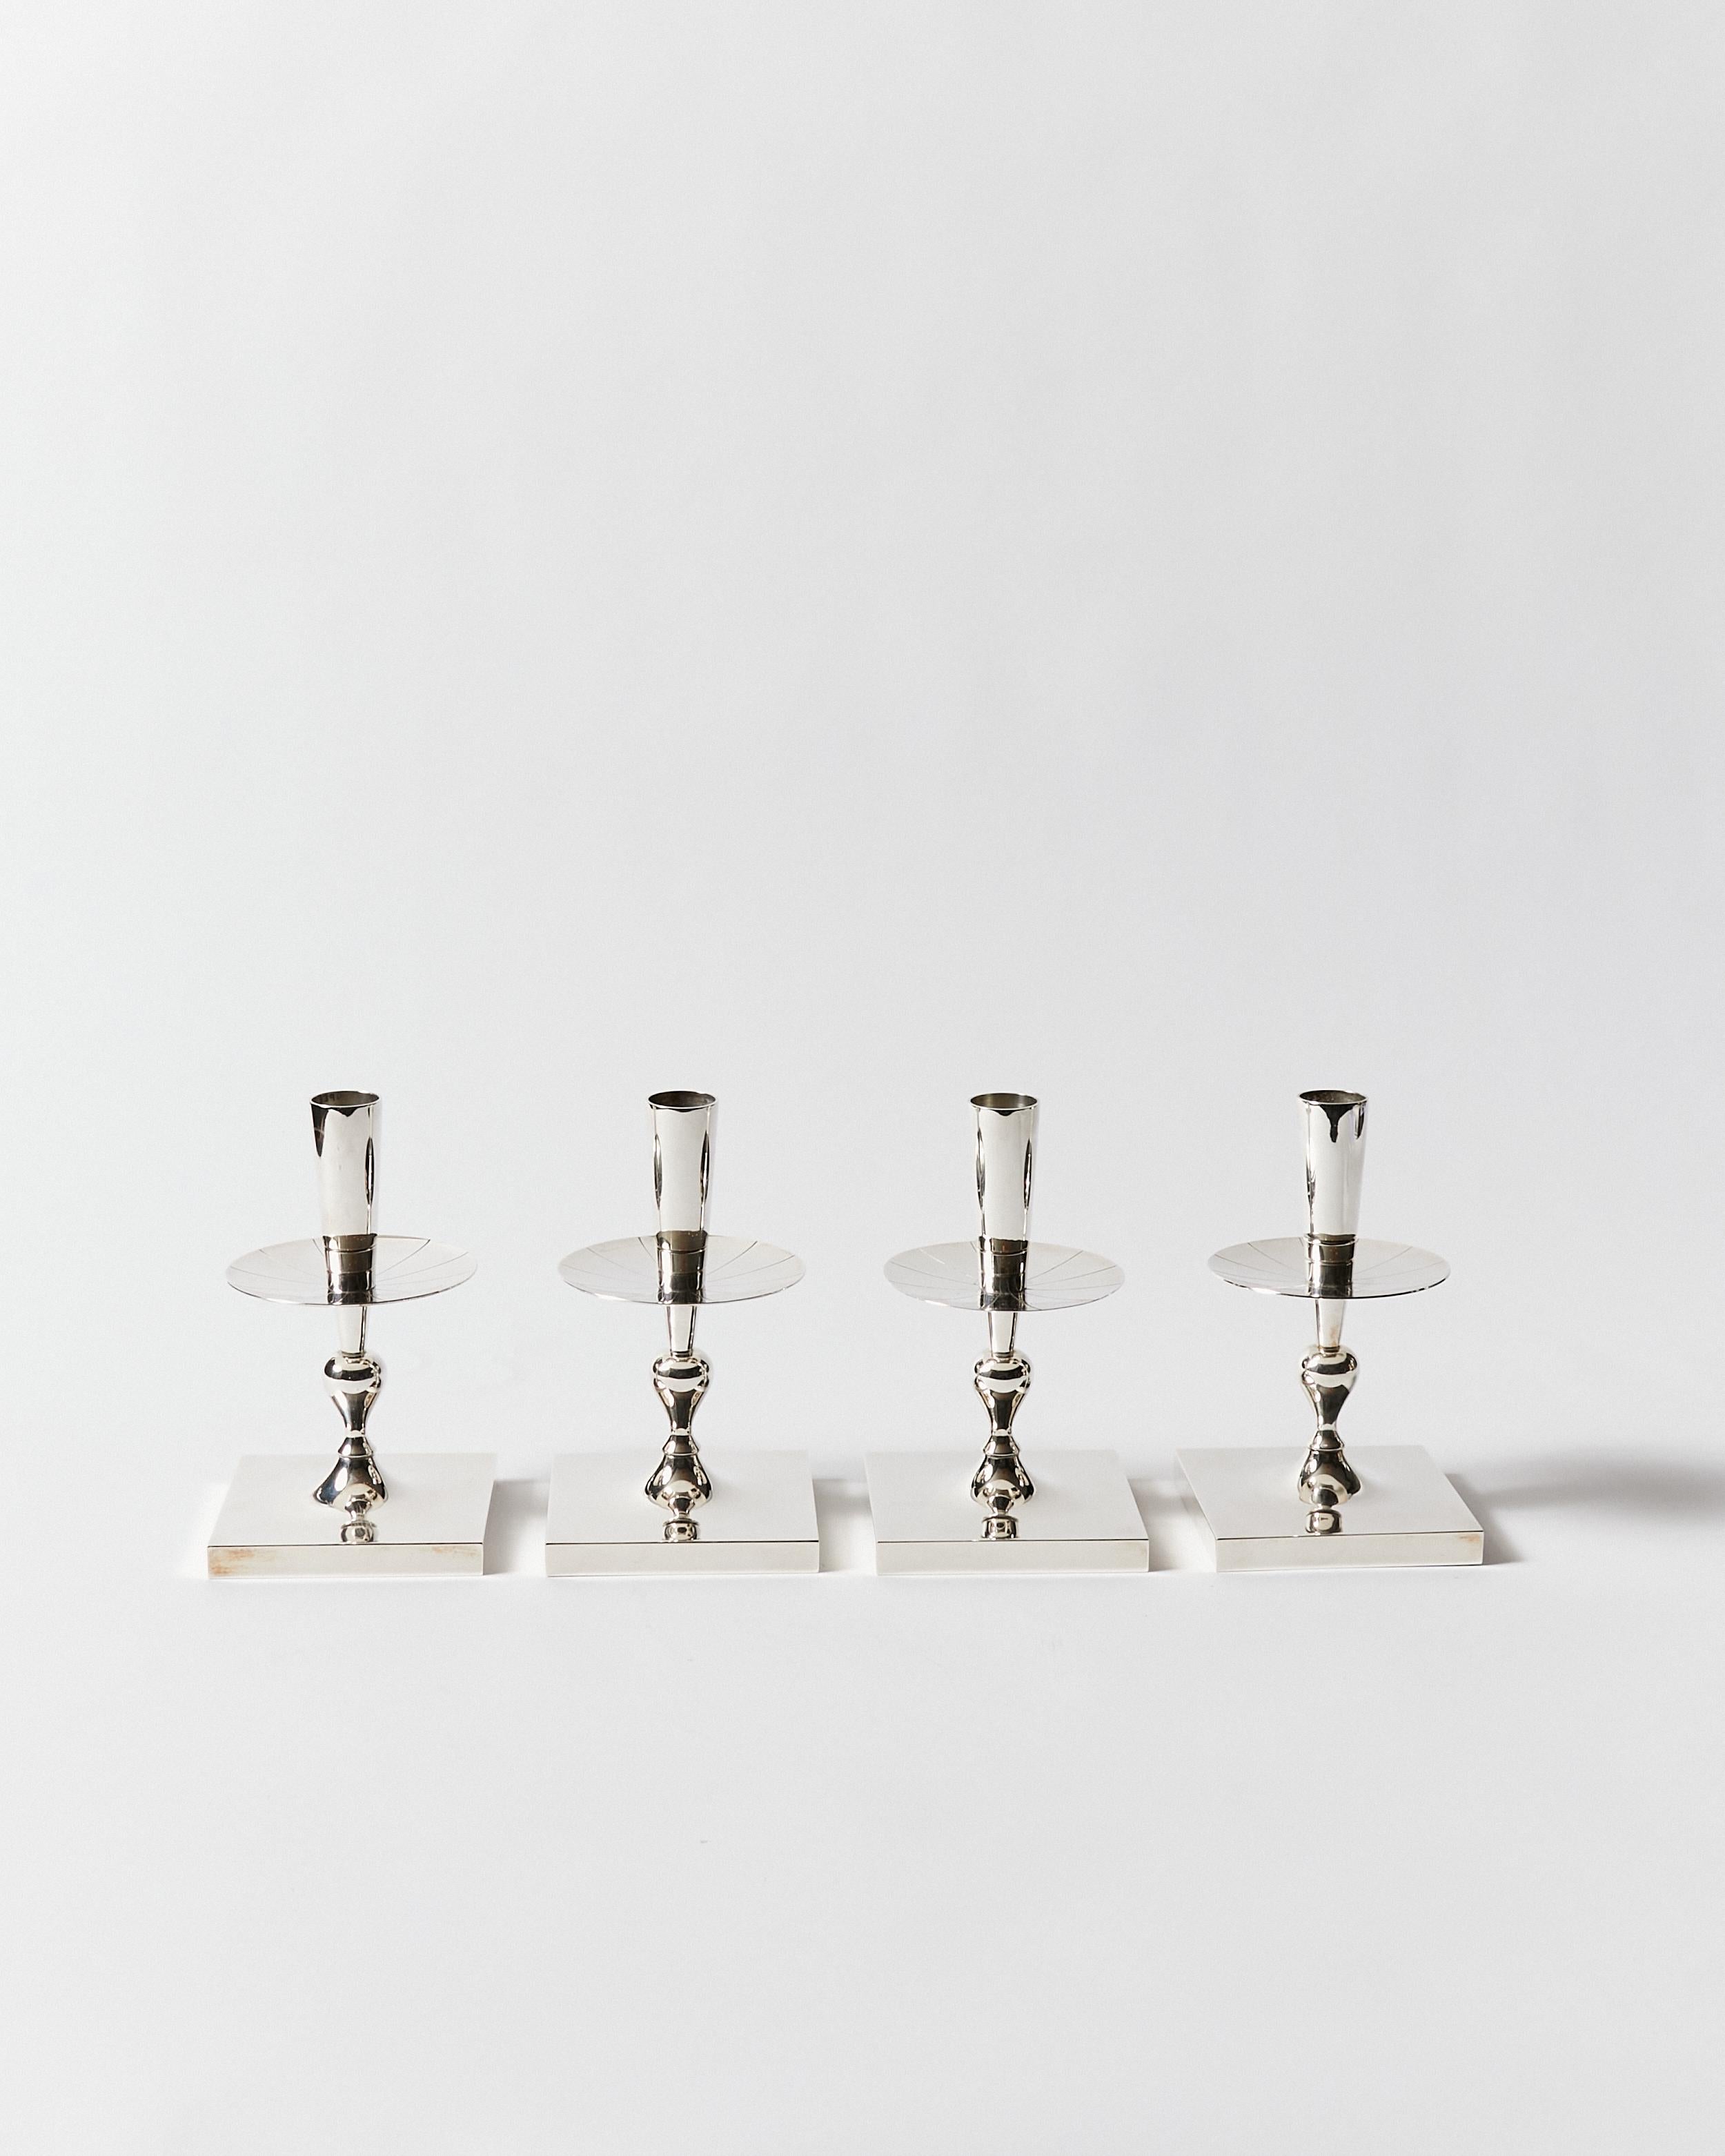 Set of four candlesticks with a square base, stylized column and engraved drip plate. Designed by Tommi Parzinger for Dorlyn-Silversmiths. Signature stamp on bottom.